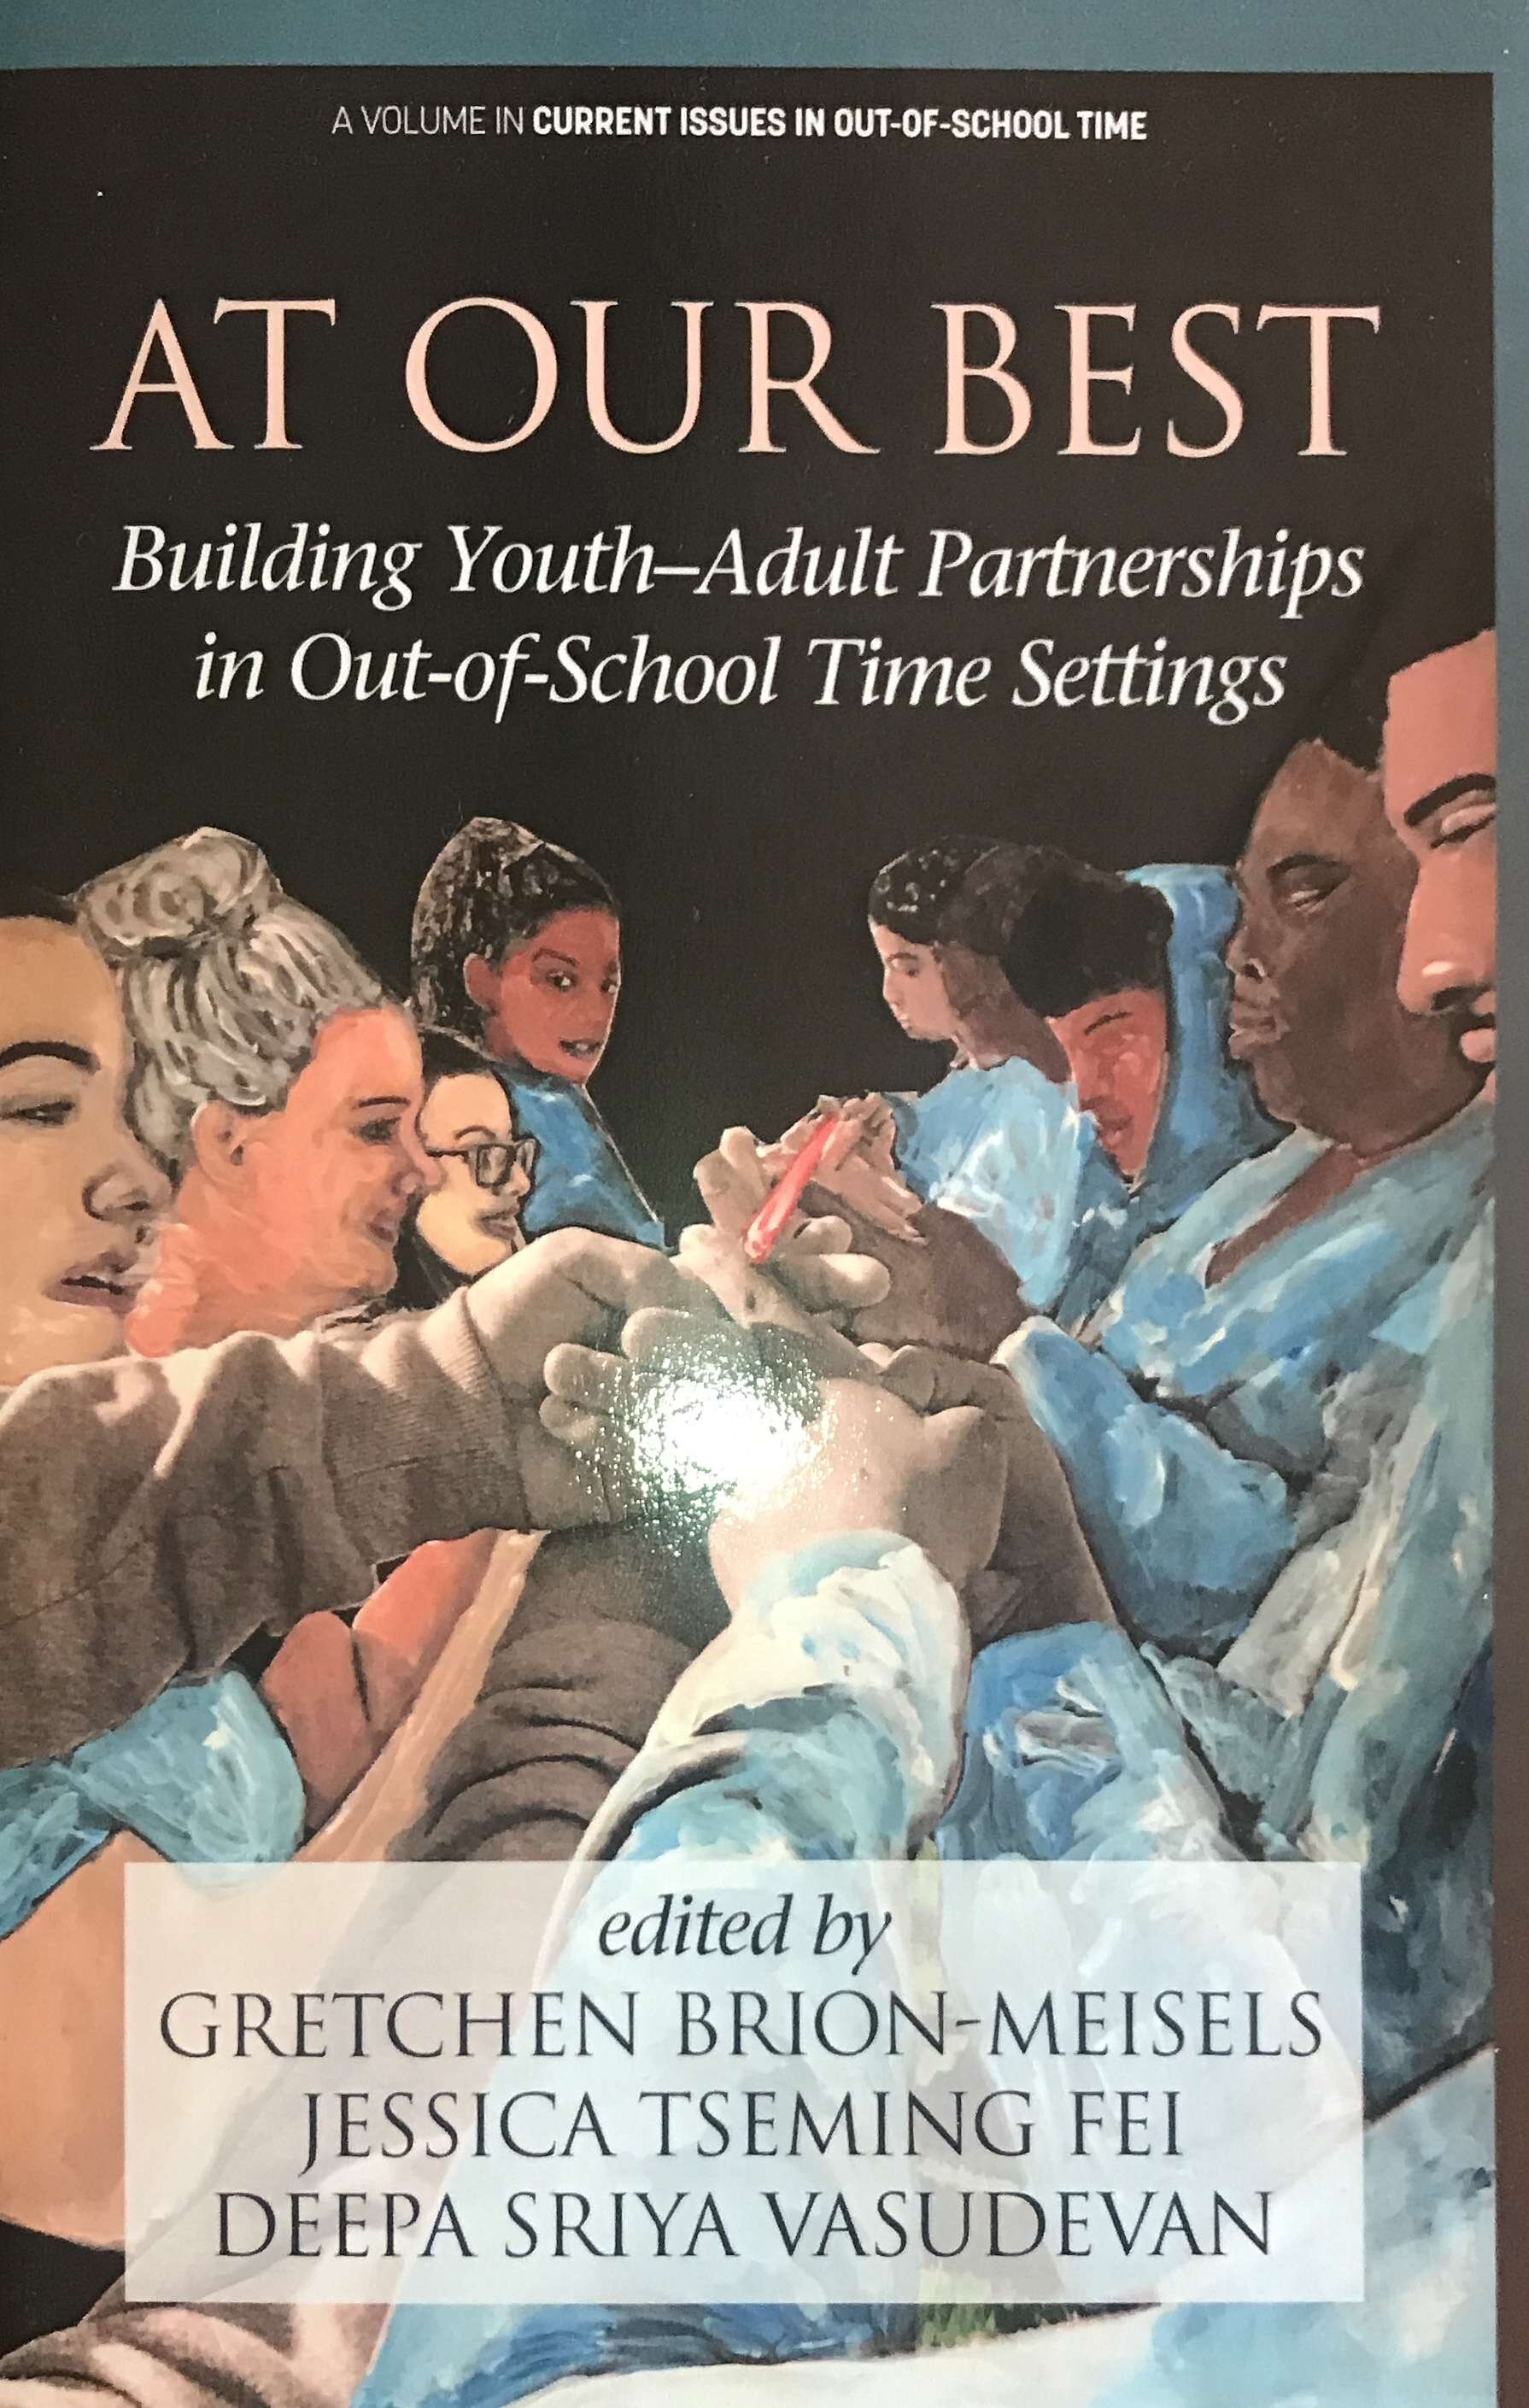 "Why Couldn't That Have Been Me?" Reflections on Confronting Adultism in Education Organizing Spaces